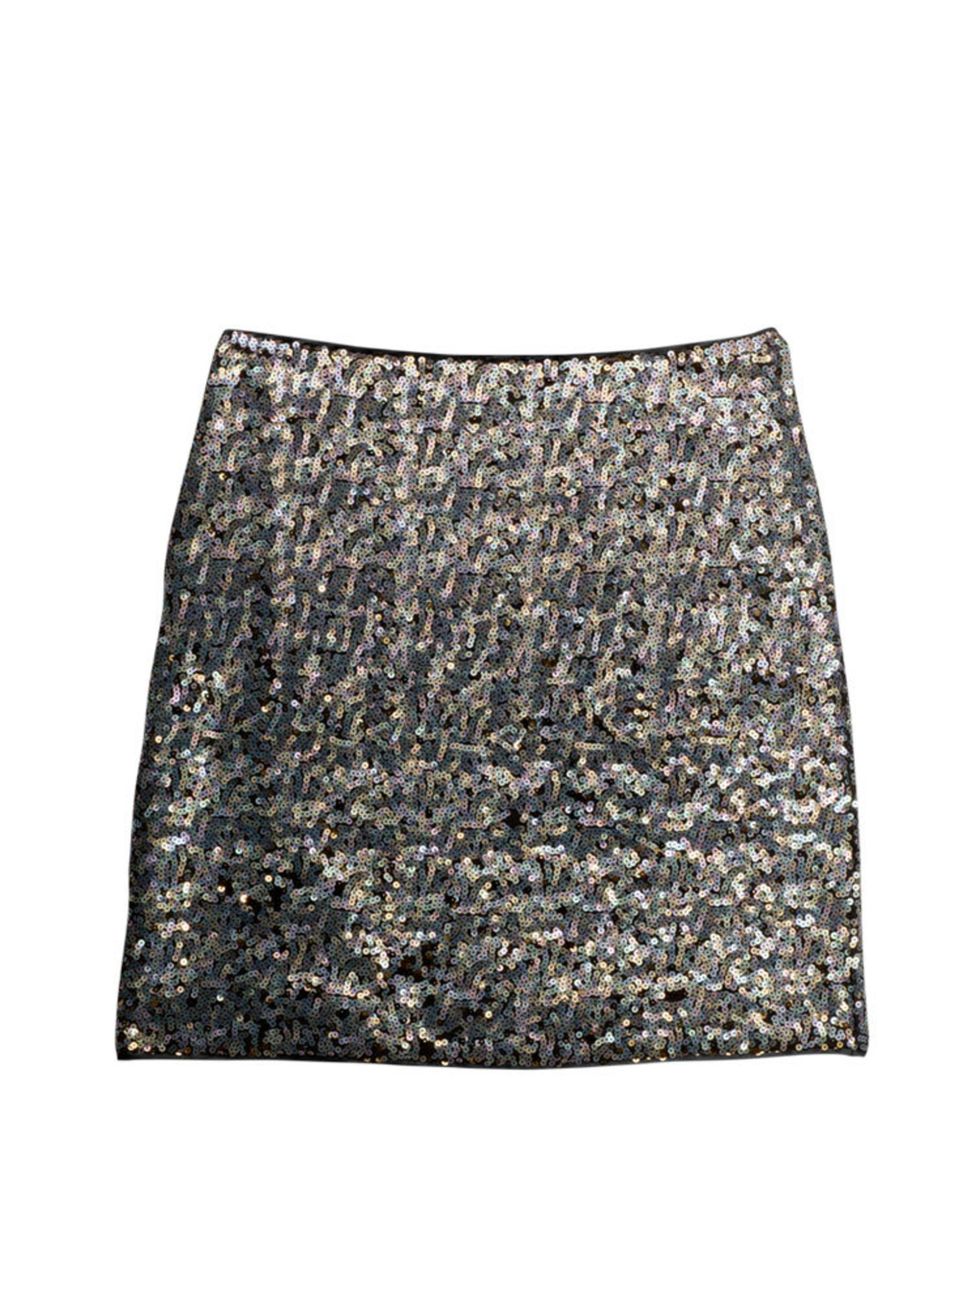 <p><a href="http://www.stories.com/gb/Ready-to-wear/Skirts/Sequin_Skirt/590576-9417572.1" target="_blank">& Other Stories skirt</a>, £45 </p>